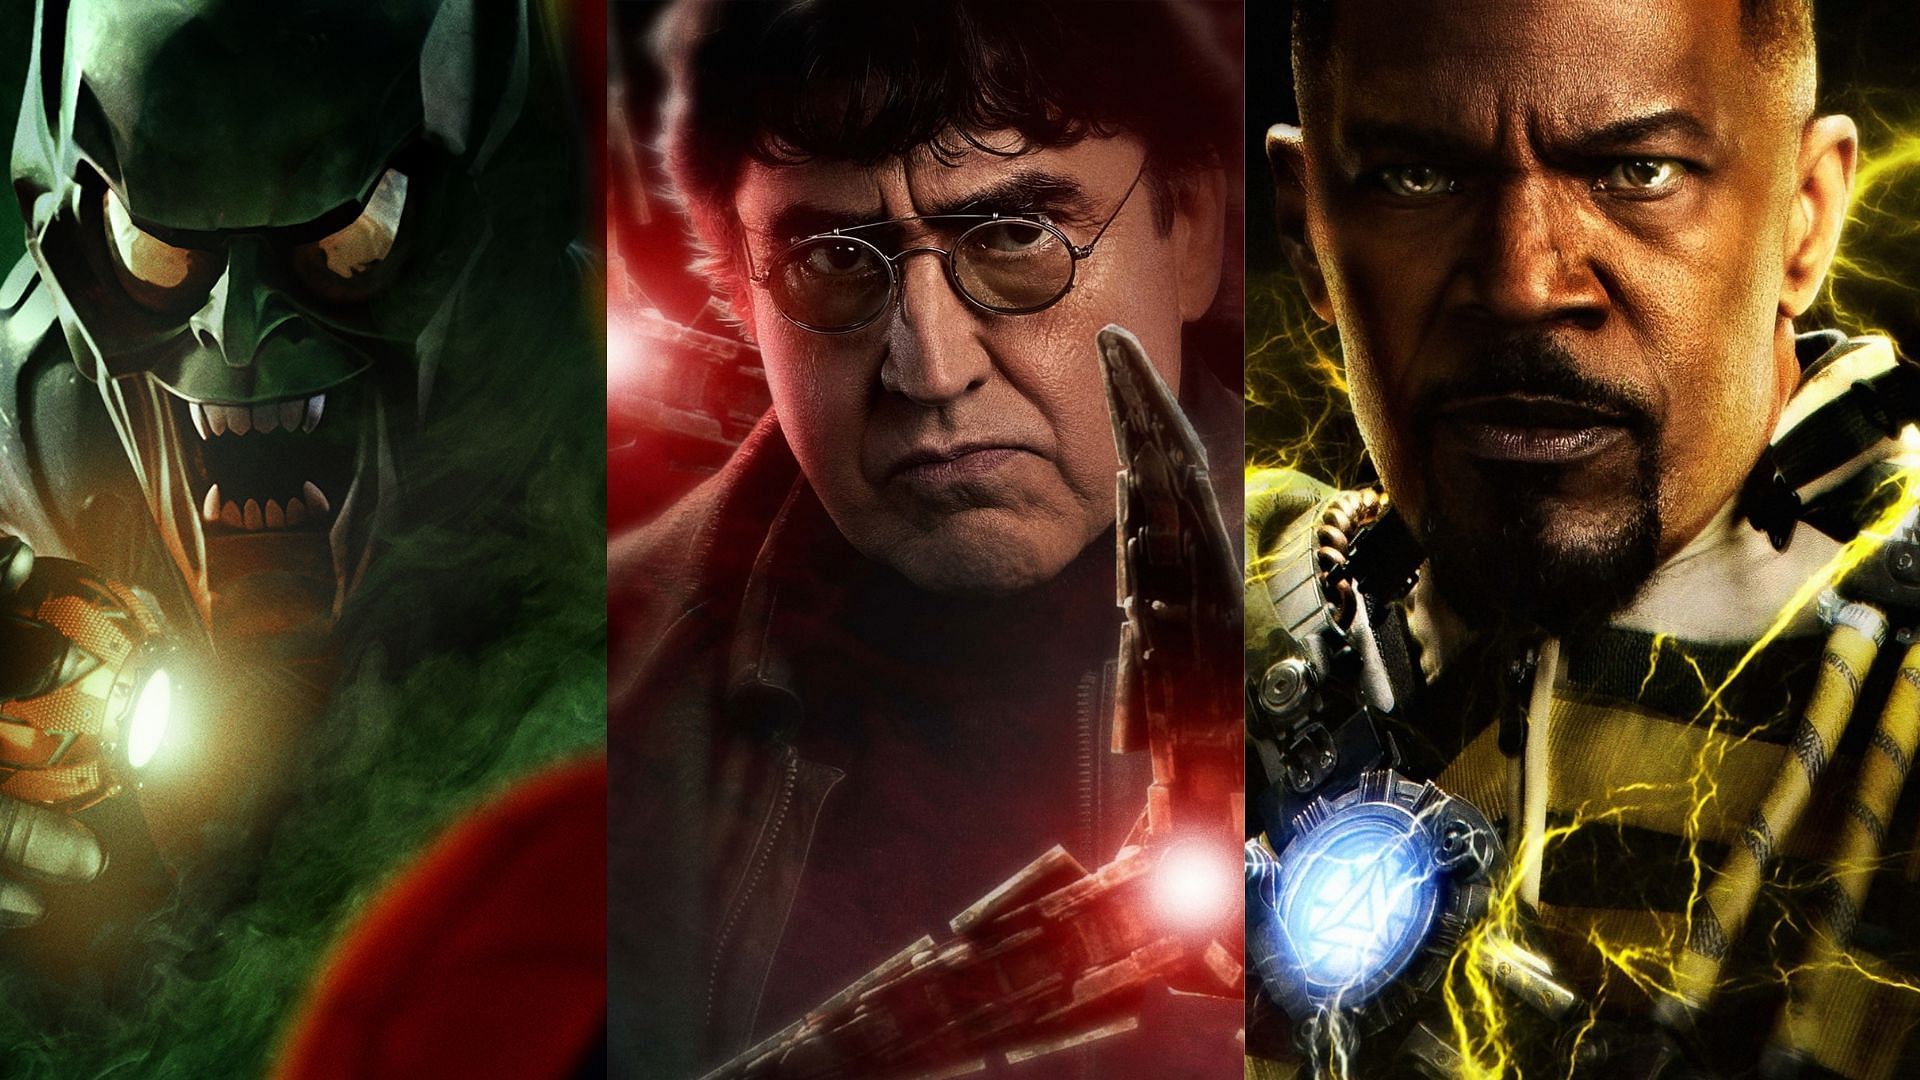 Green Goblin, Doc Ock, and Electro in promotional posters for Spider-Man: No Way Home (Images via Sony Pictures/Marvel Studios)